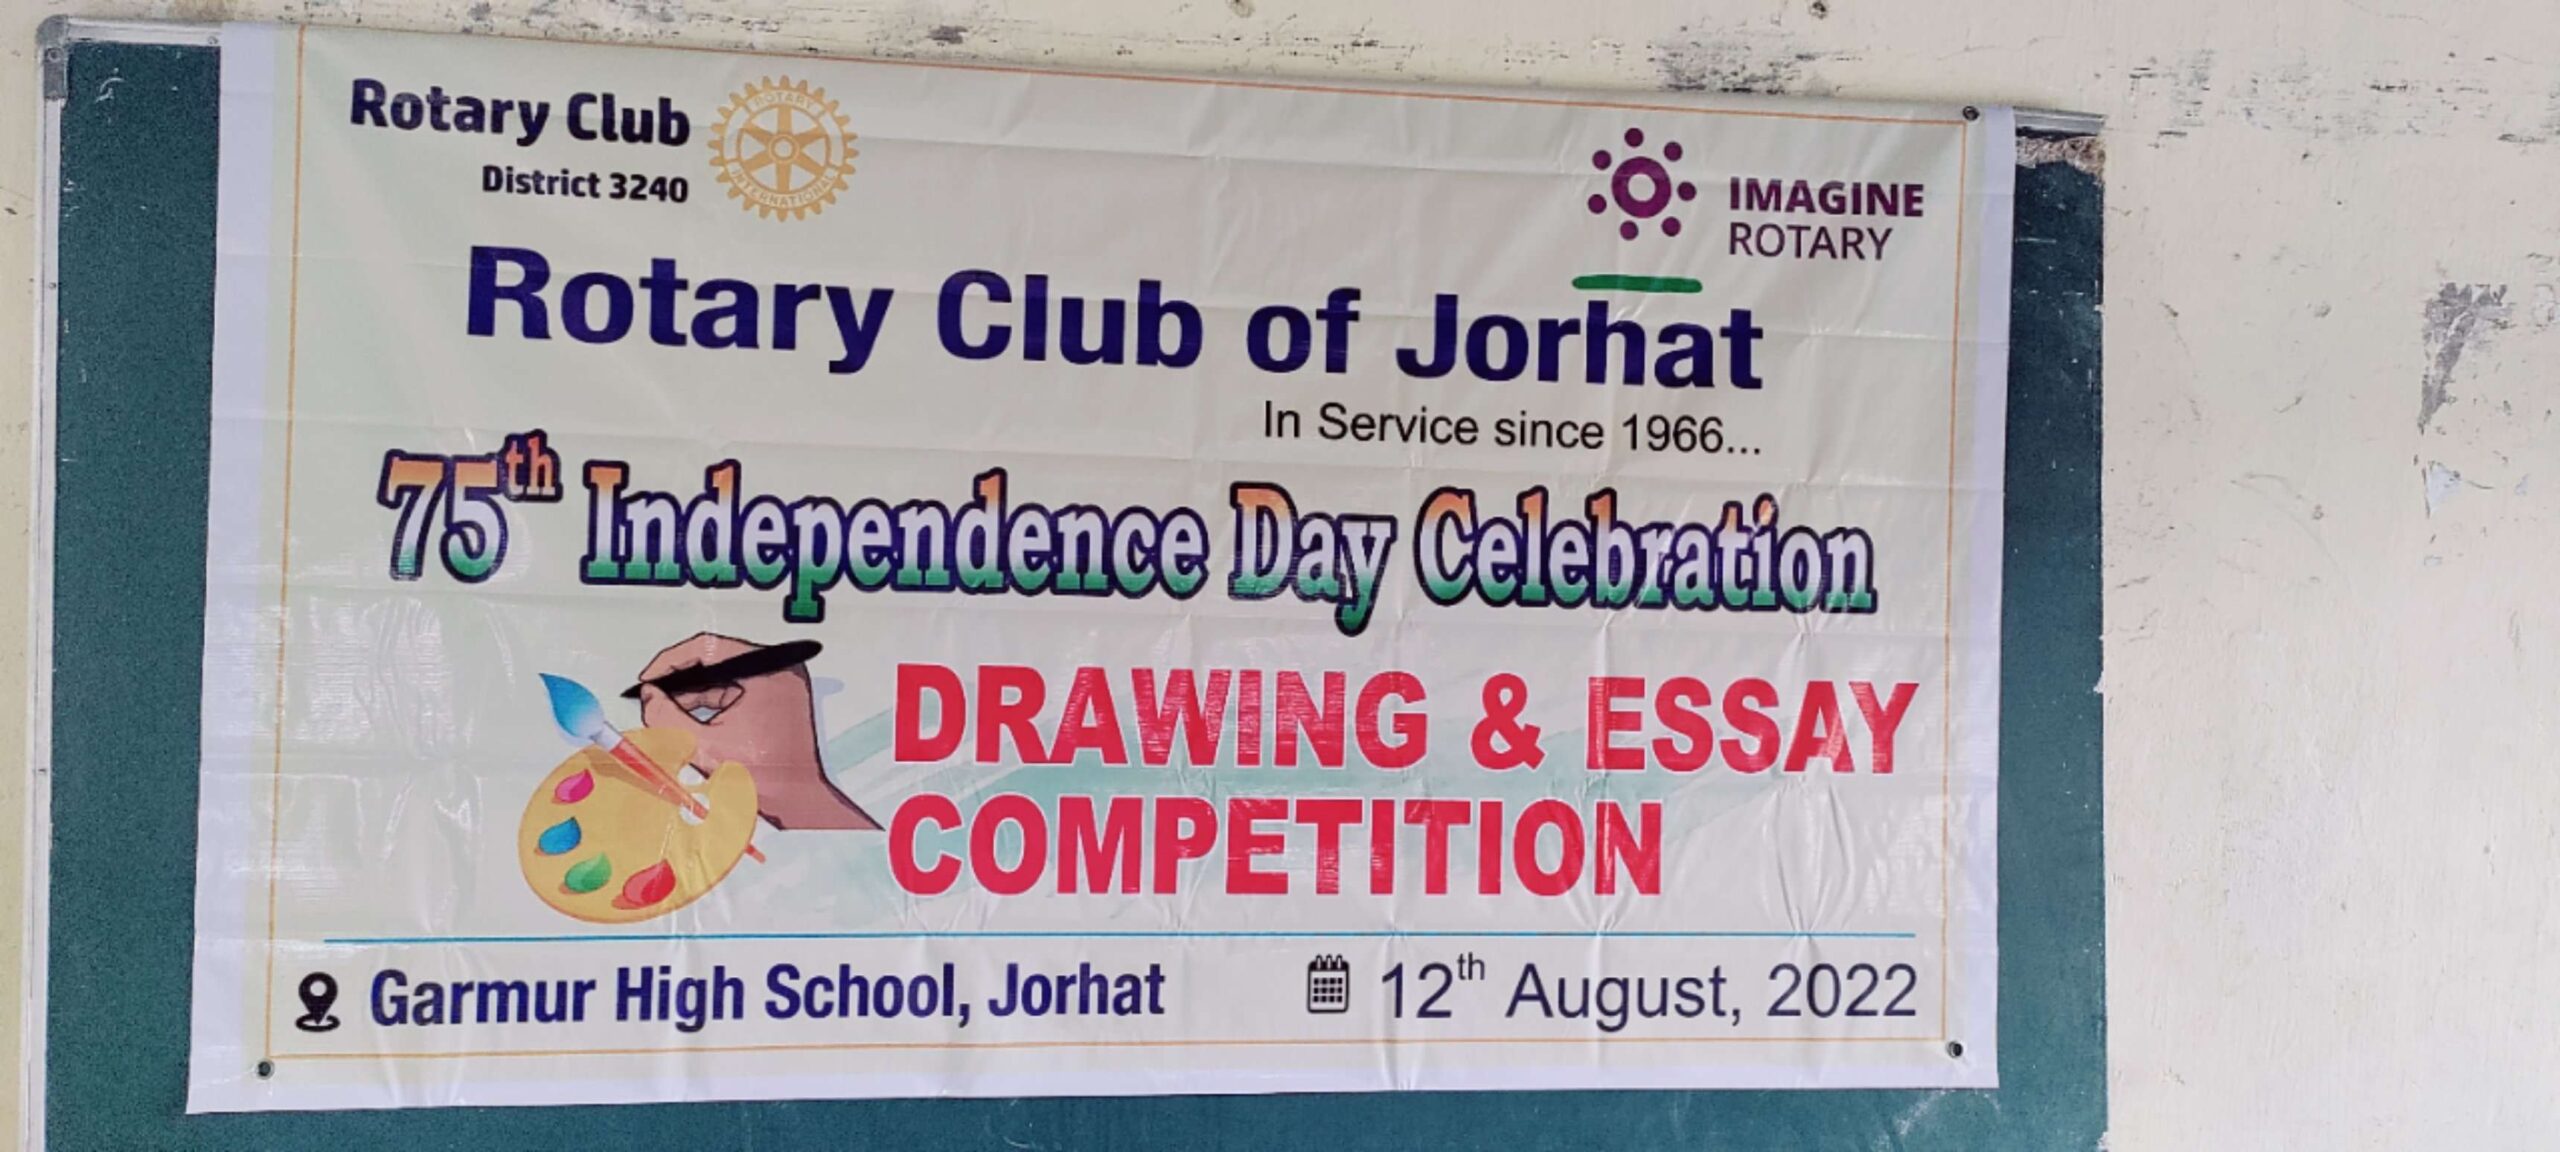 Drawing and essay competition among school students